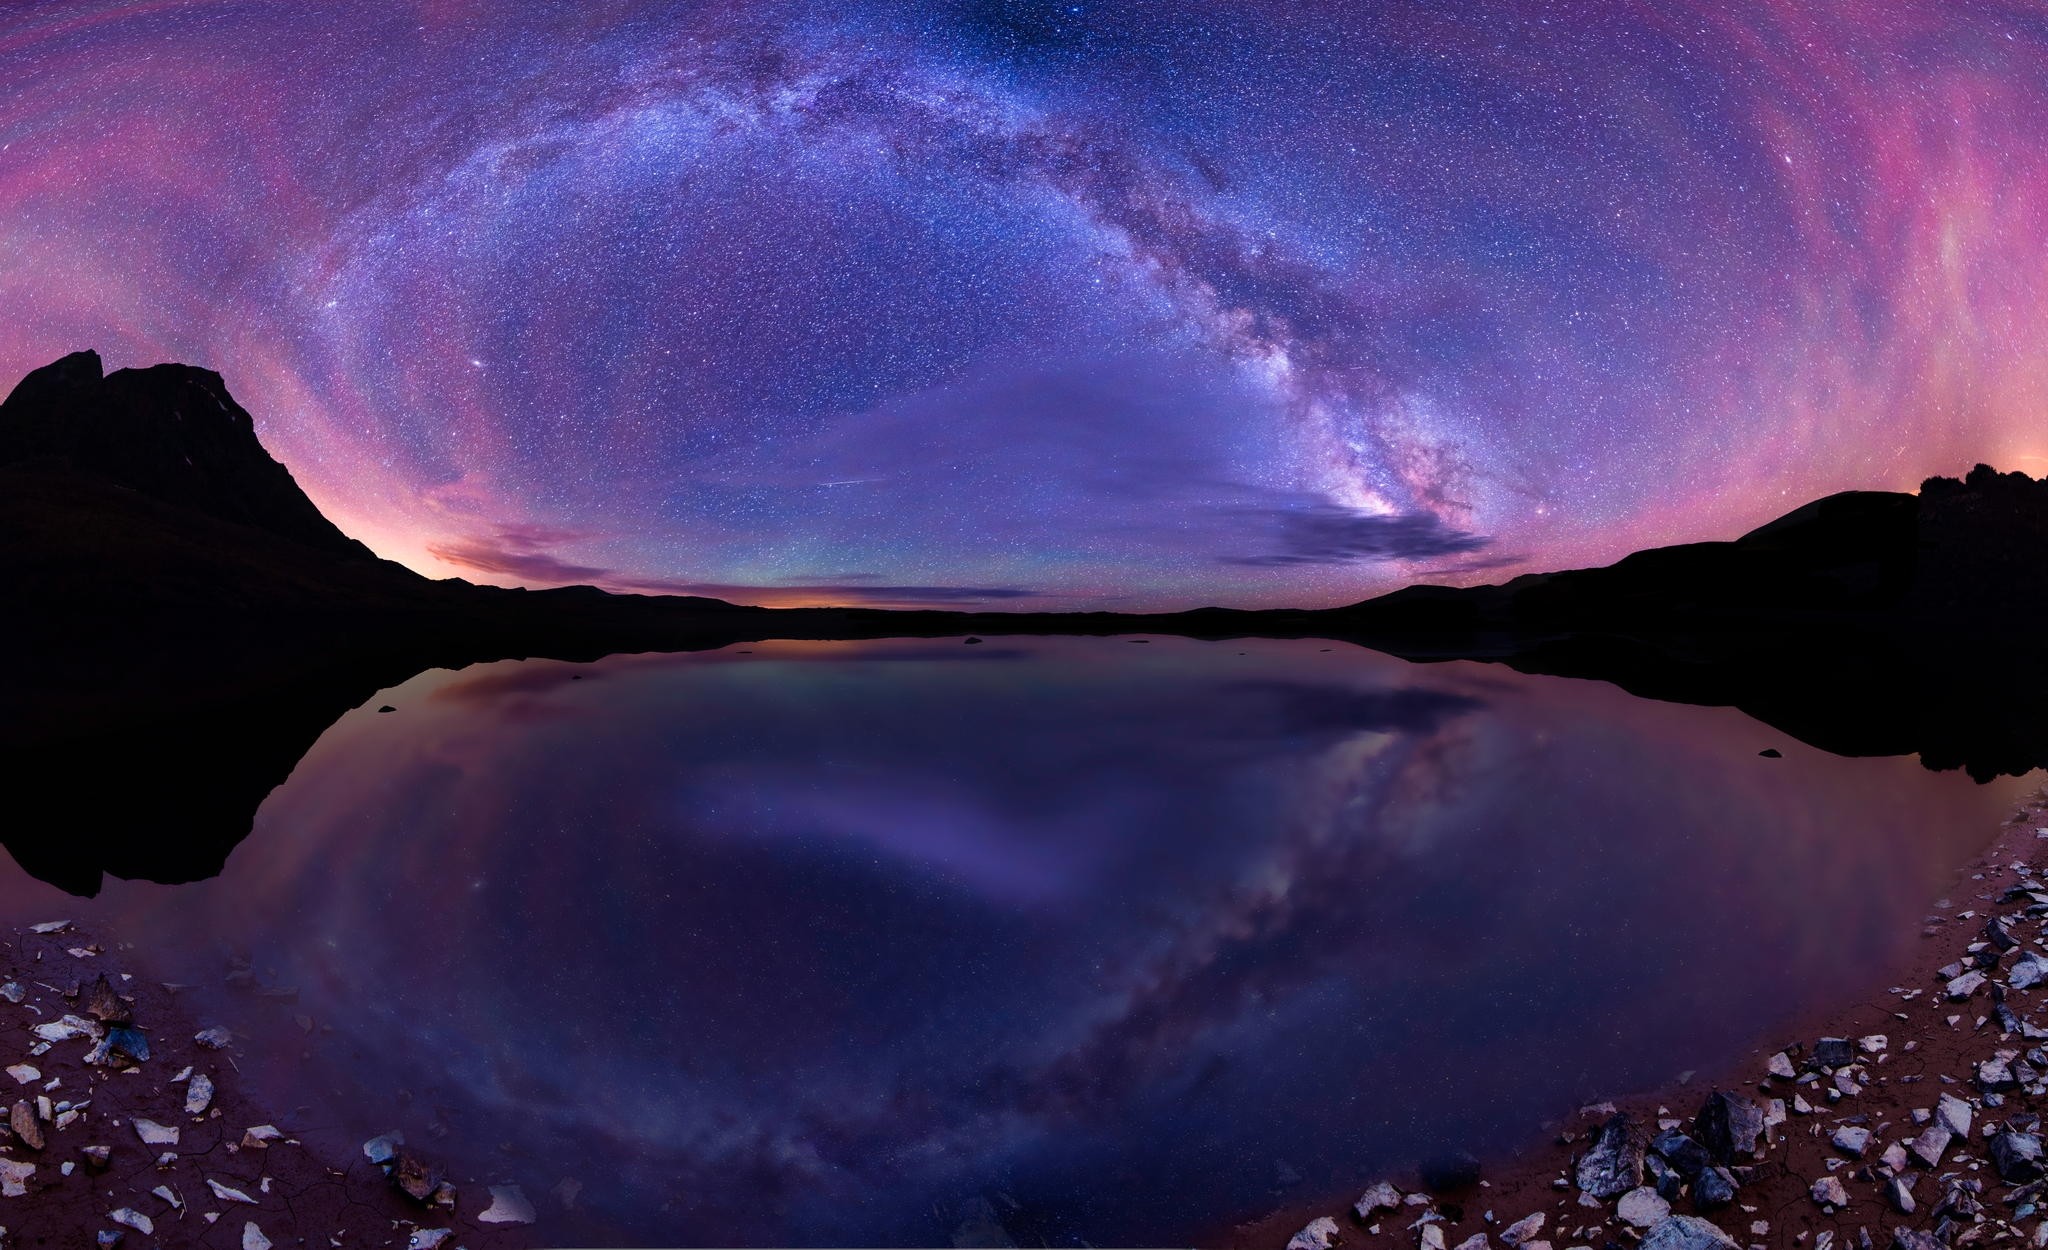 General 2048x1250 nature photography landscape Milky Way starry night galaxy lake reflection long exposure hills